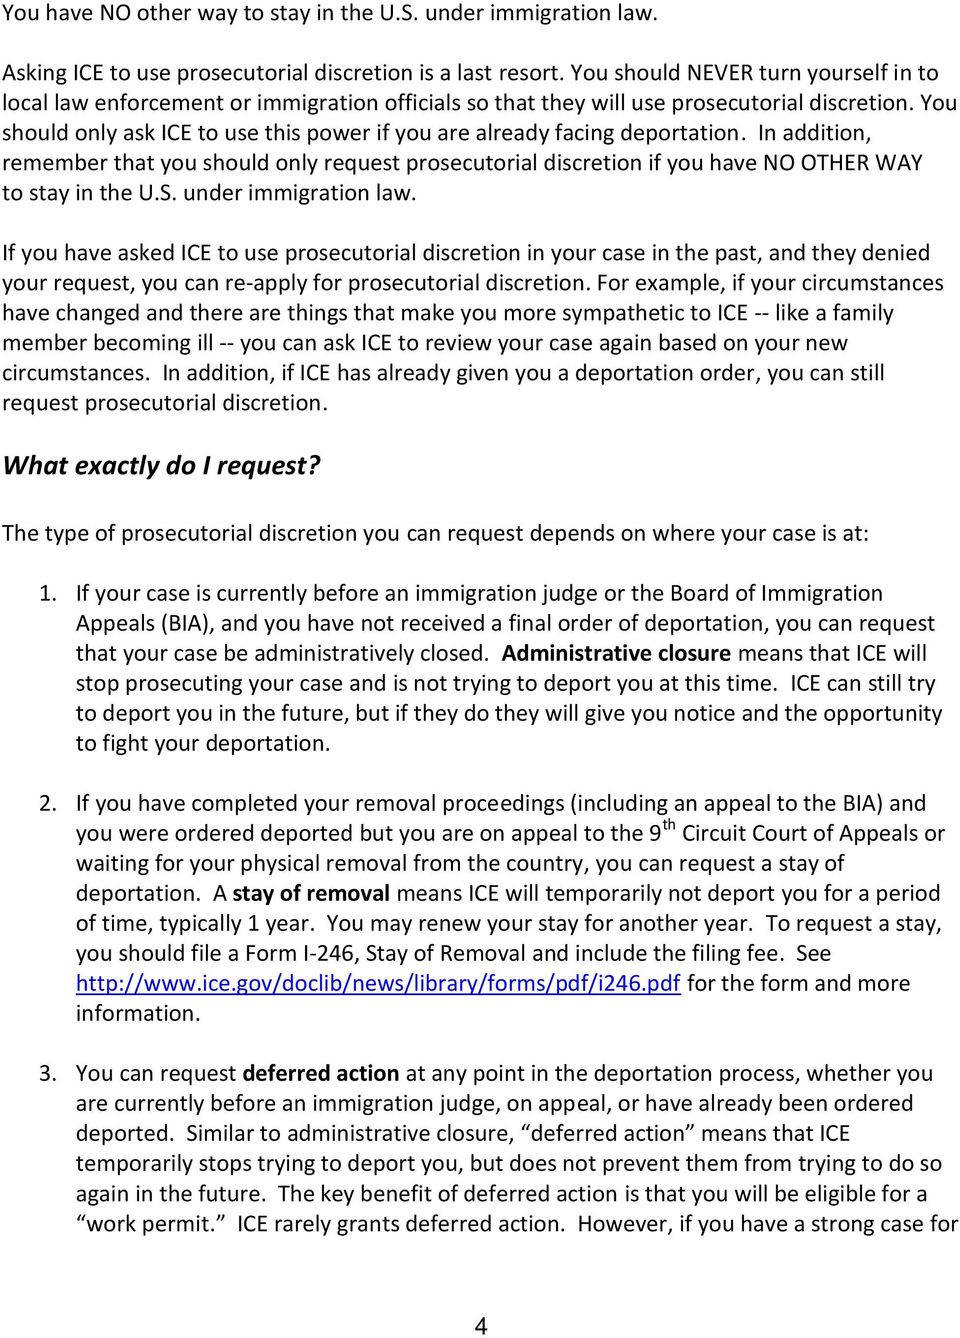 You should only ask ICE to use this power if you are already facing deportation. In addition, remember that you should only request prosecutorial discretion if you have NO OTHER WAY to stay in the U.